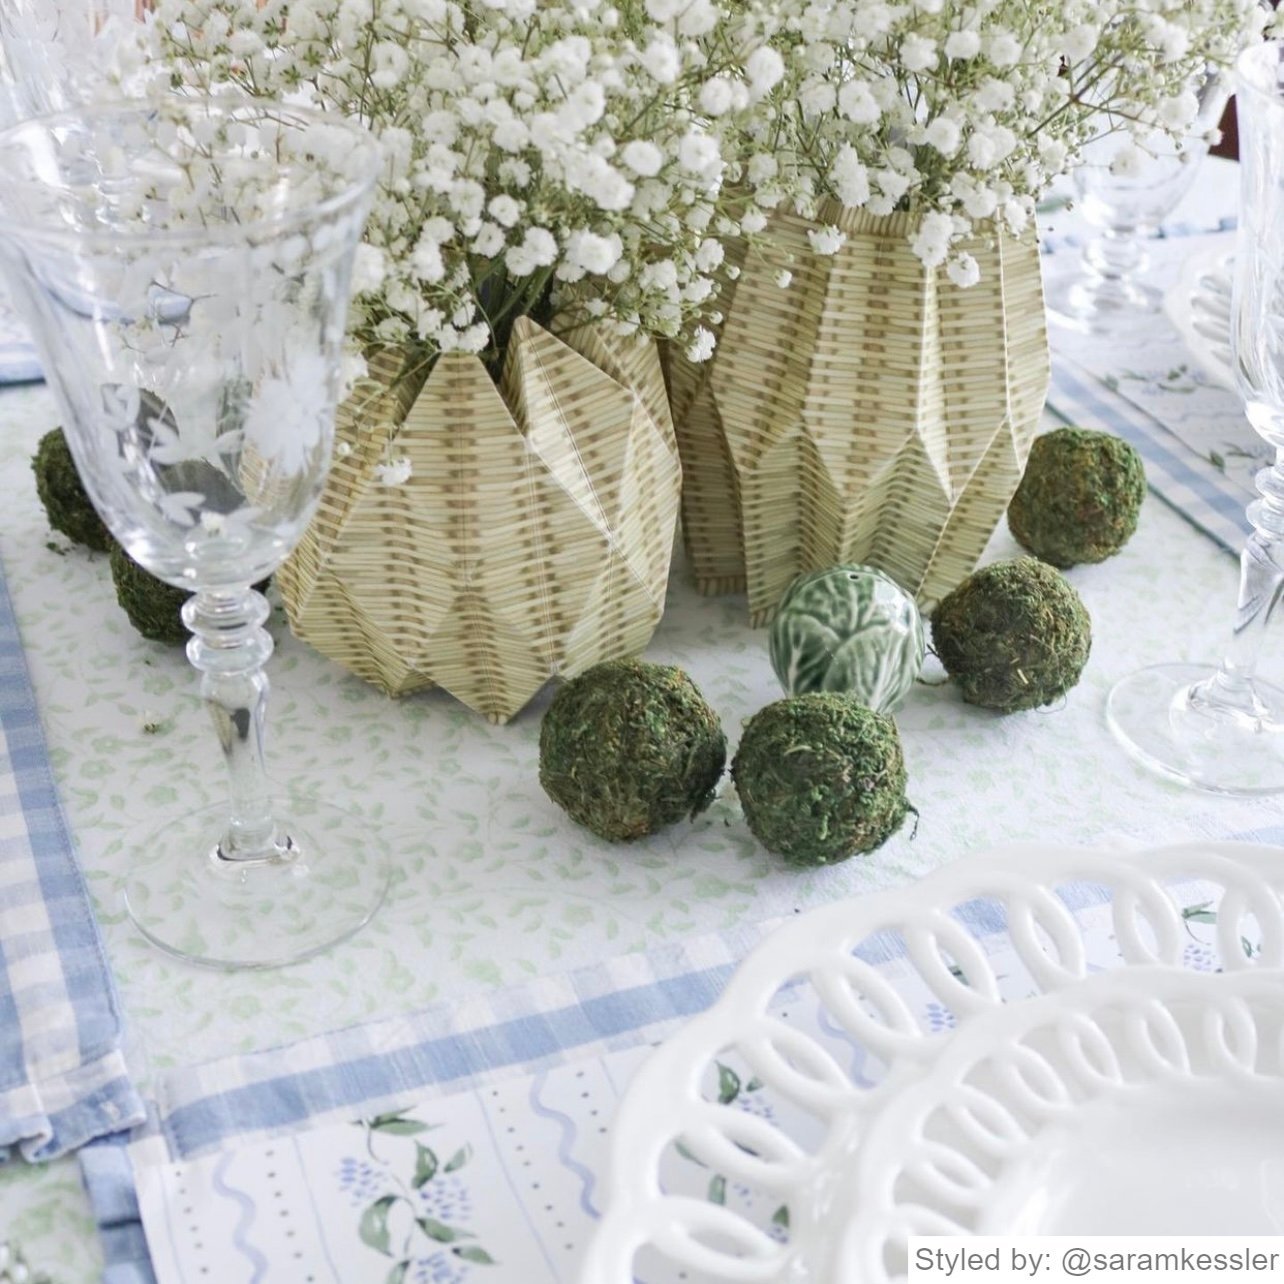 Wicker paper vases with baby's breath on a blue tablecloth